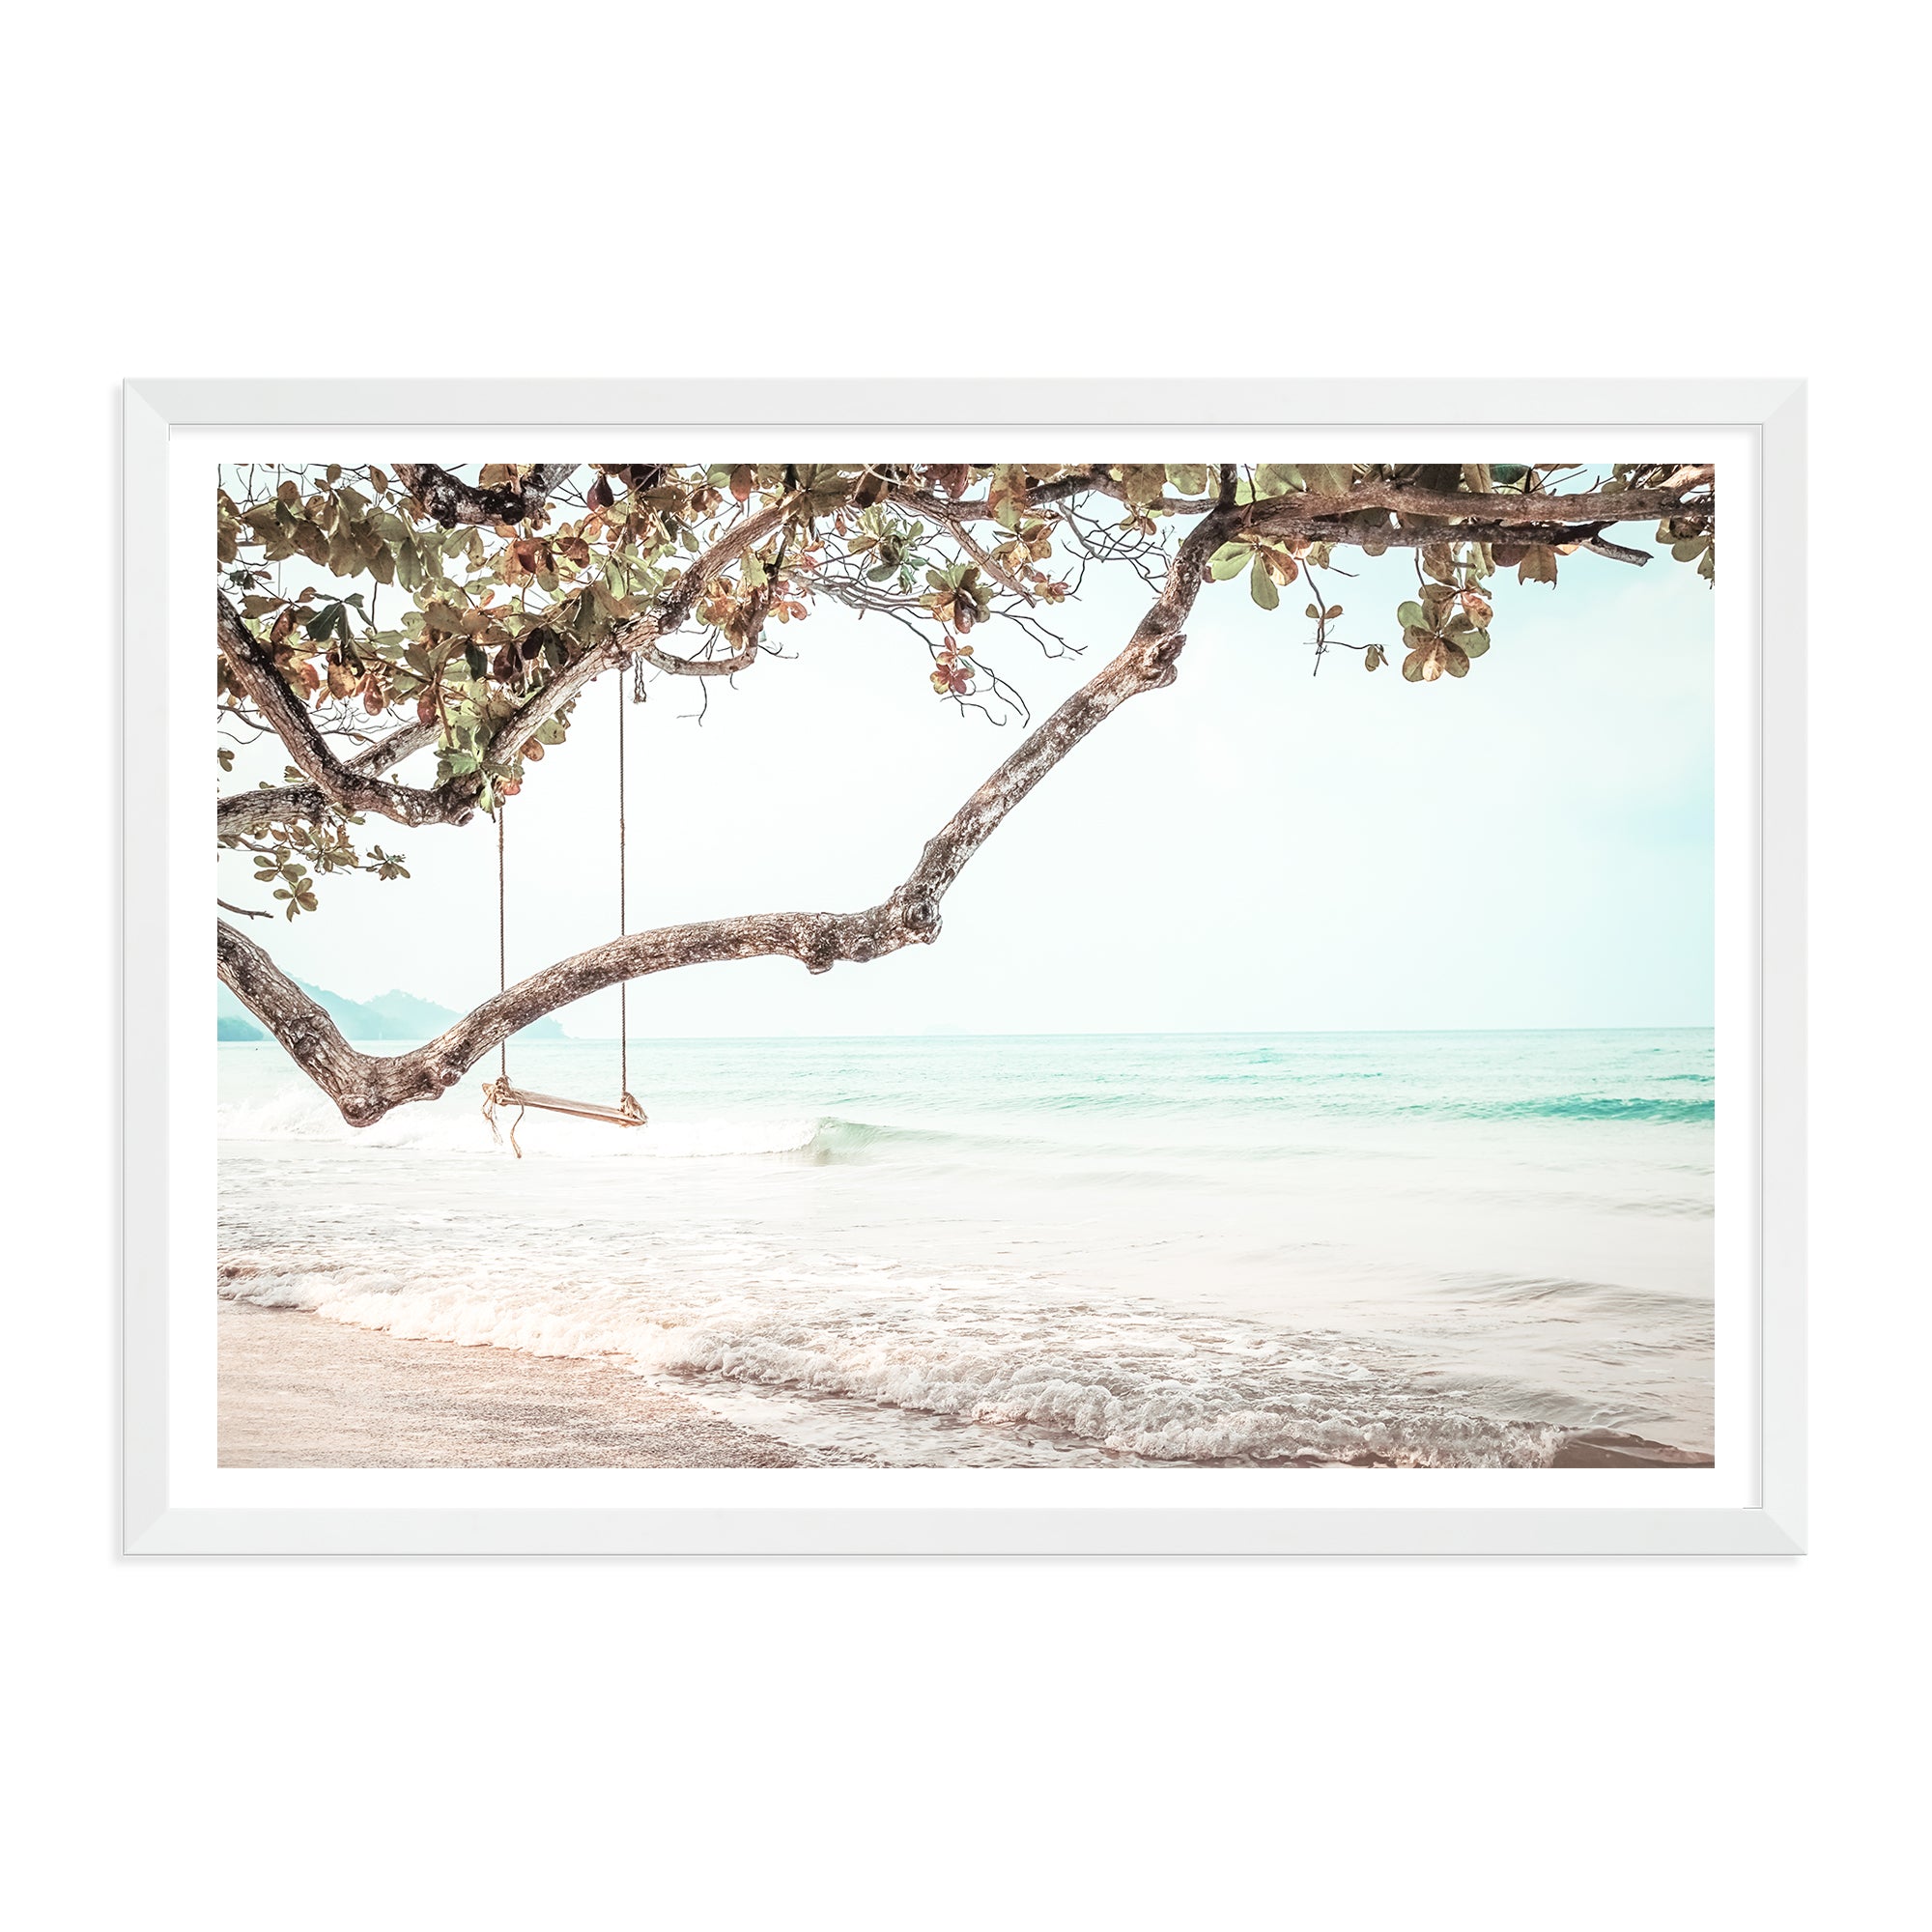 An artwork of a relaxing view of the sea with a swing in the trees by the beach, available in print and canvas. 